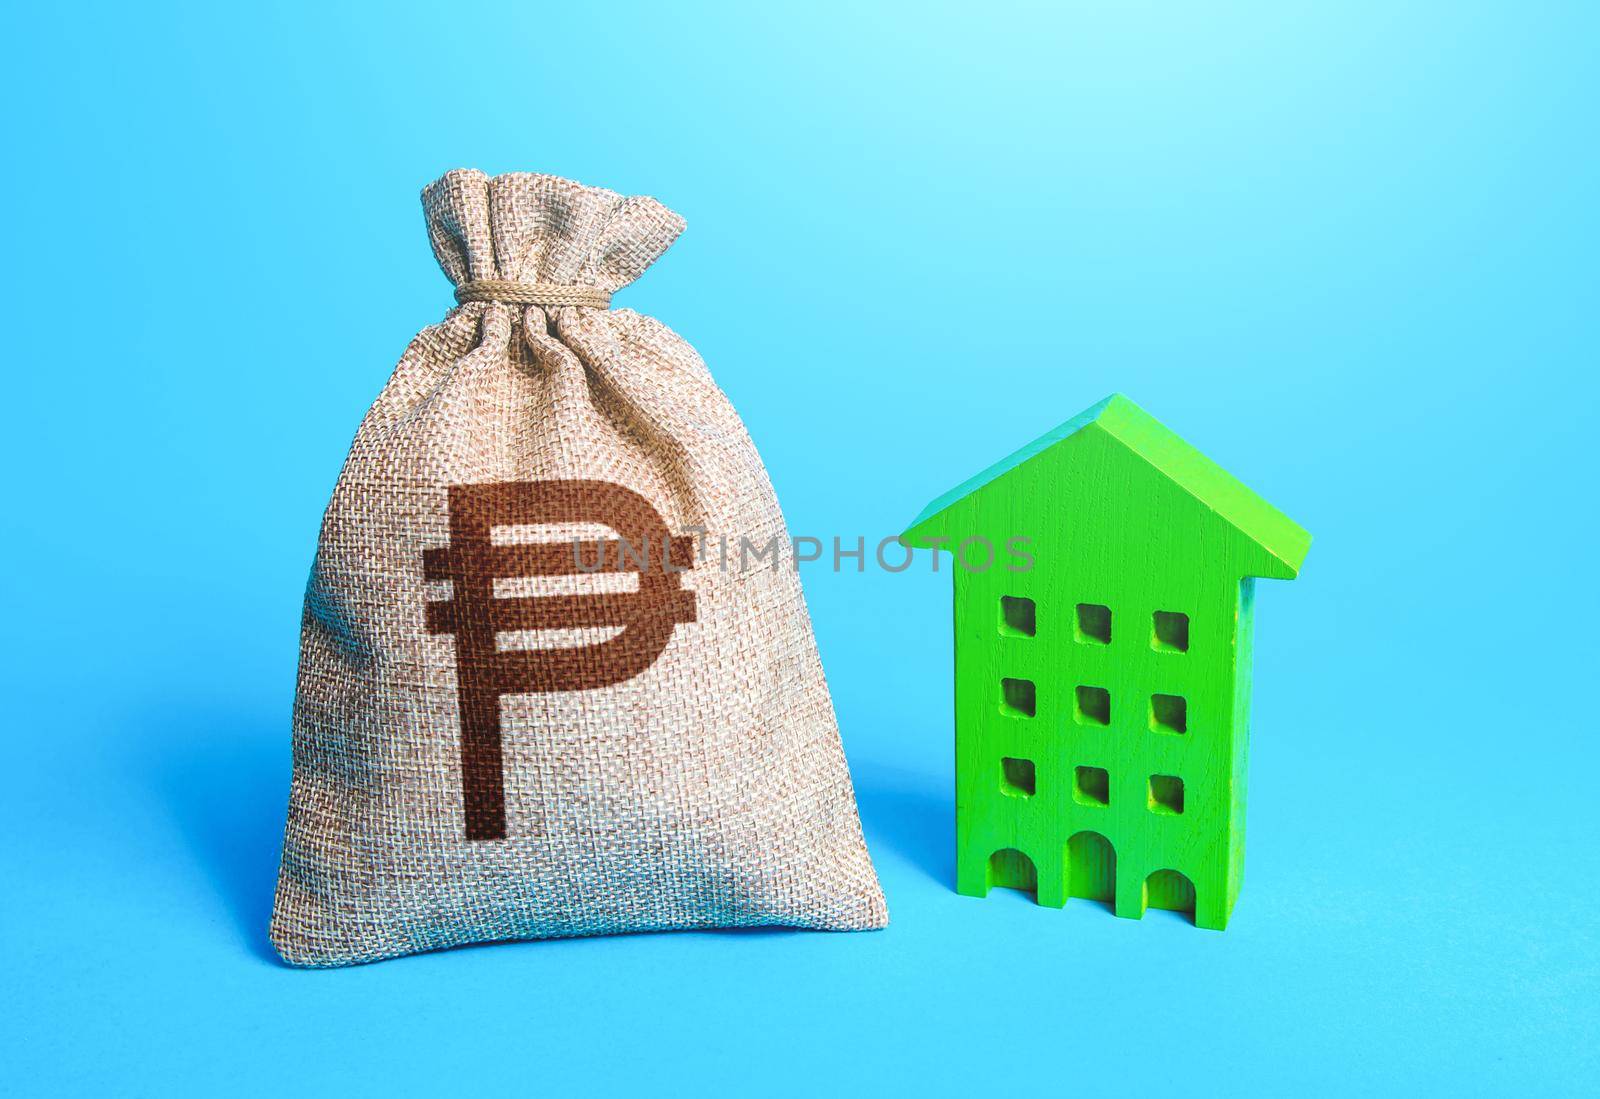 Philippine peso money bag and green Investments in sustainable housing. Investment in green technologies. Reduced emissions, improved energy efficiency. Reducing impact on environment. by iLixe48